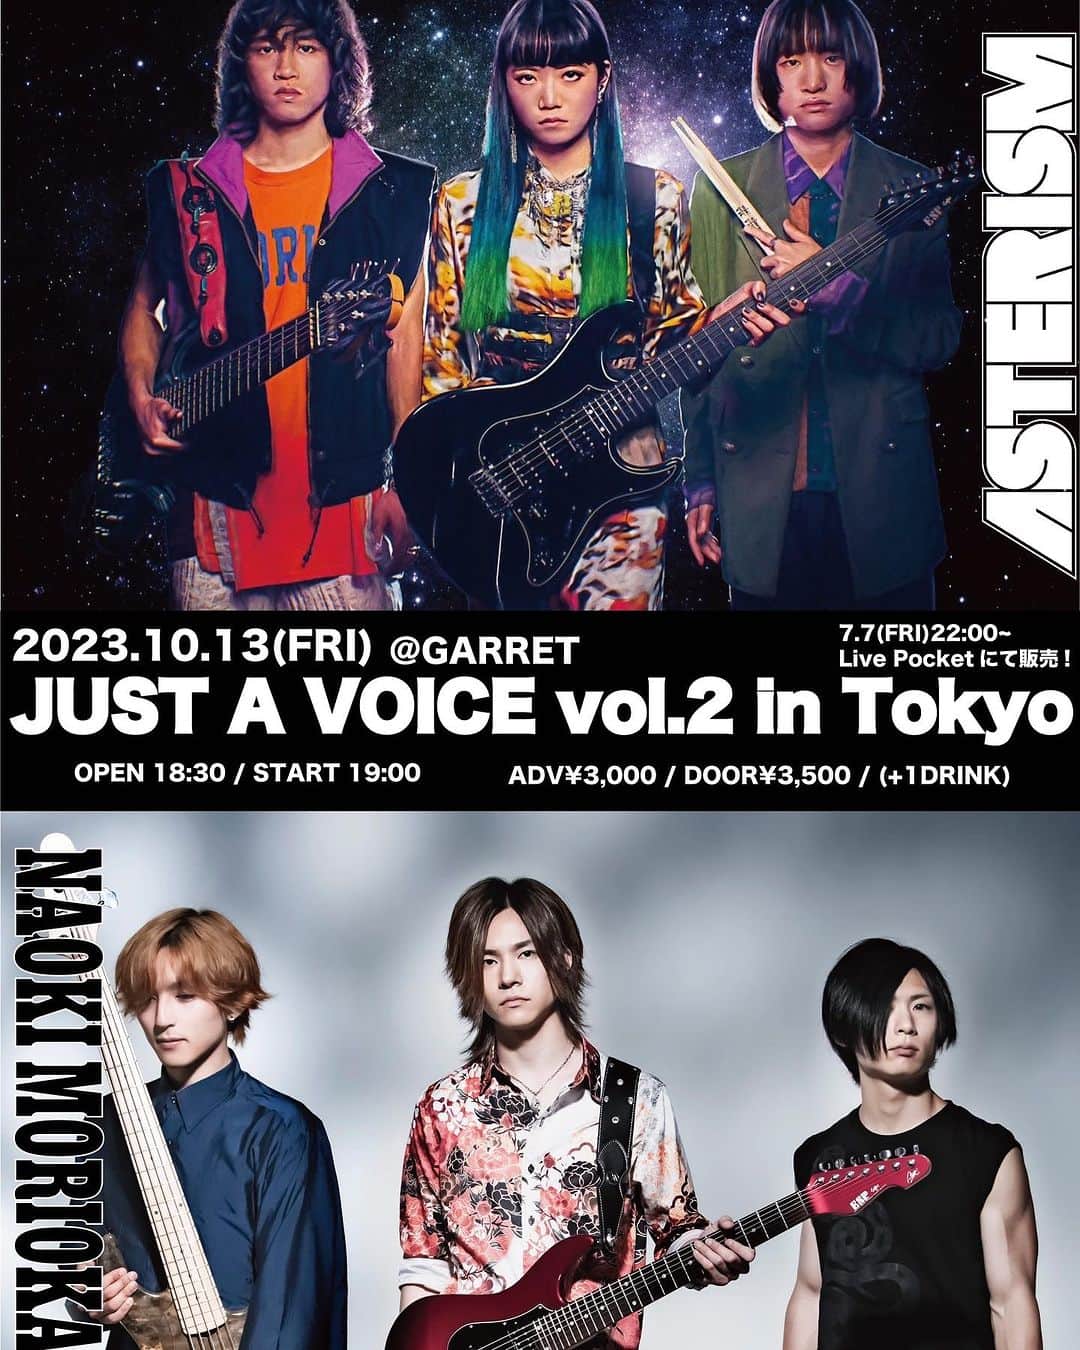 ASTERISM（アステリズム）のインスタグラム：「・ 🔹LIVE🔹 2023年10月、 @naokimorioka_gt さんとの2マンツアー 「JUST A VOICE vol.2」の開催が決定！😆  詳細はこちら▽▽ https://asterism.asia/news/index.php?id=265  🎫in Tokyo🎫 https://t.livepocket.jp/e/ff4oe  🎫in Nagoya🎫 https://t.livepocket.jp/e/z04or  #ASTERISM #アステ  #Live」